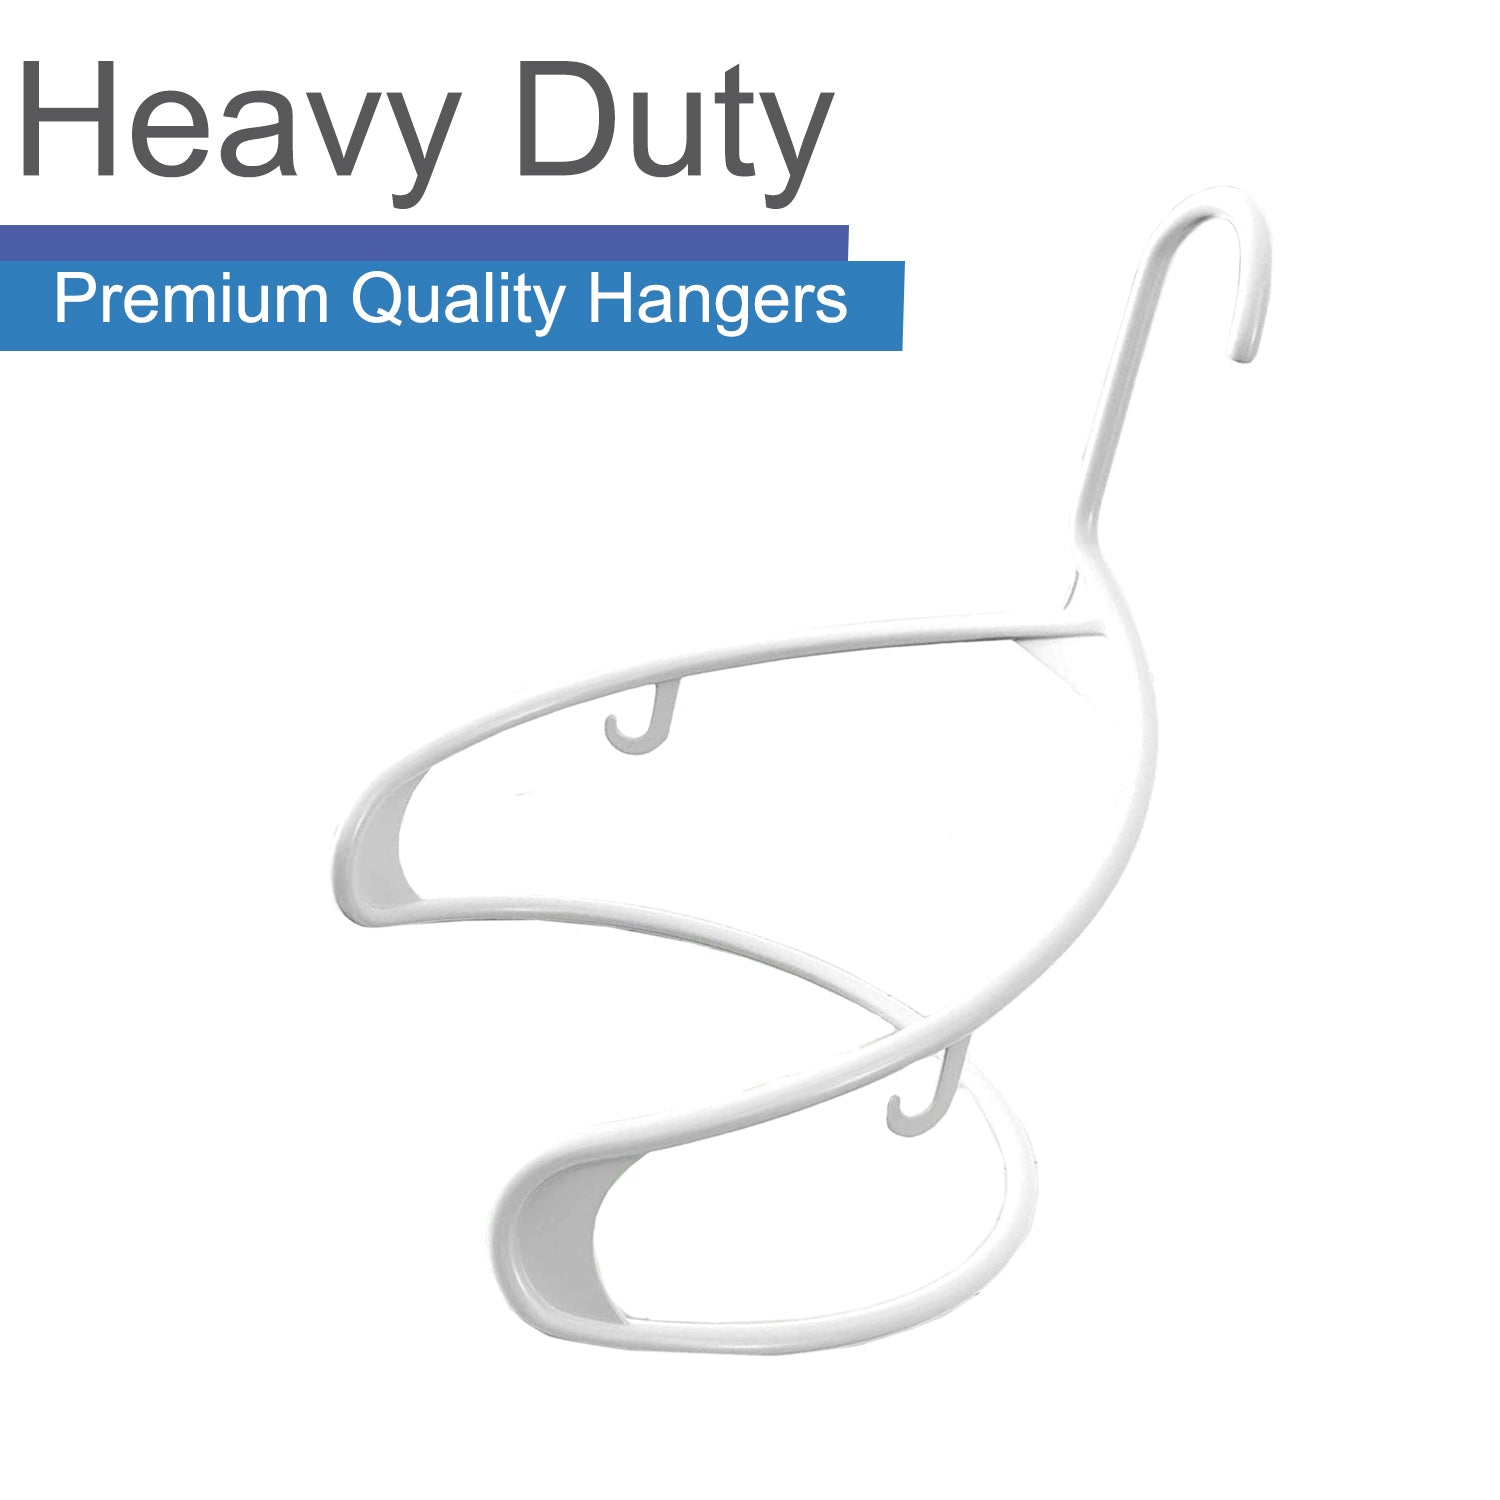 Heshberg Plastic Hangers with Notched Standard Size 20 Pack, Black